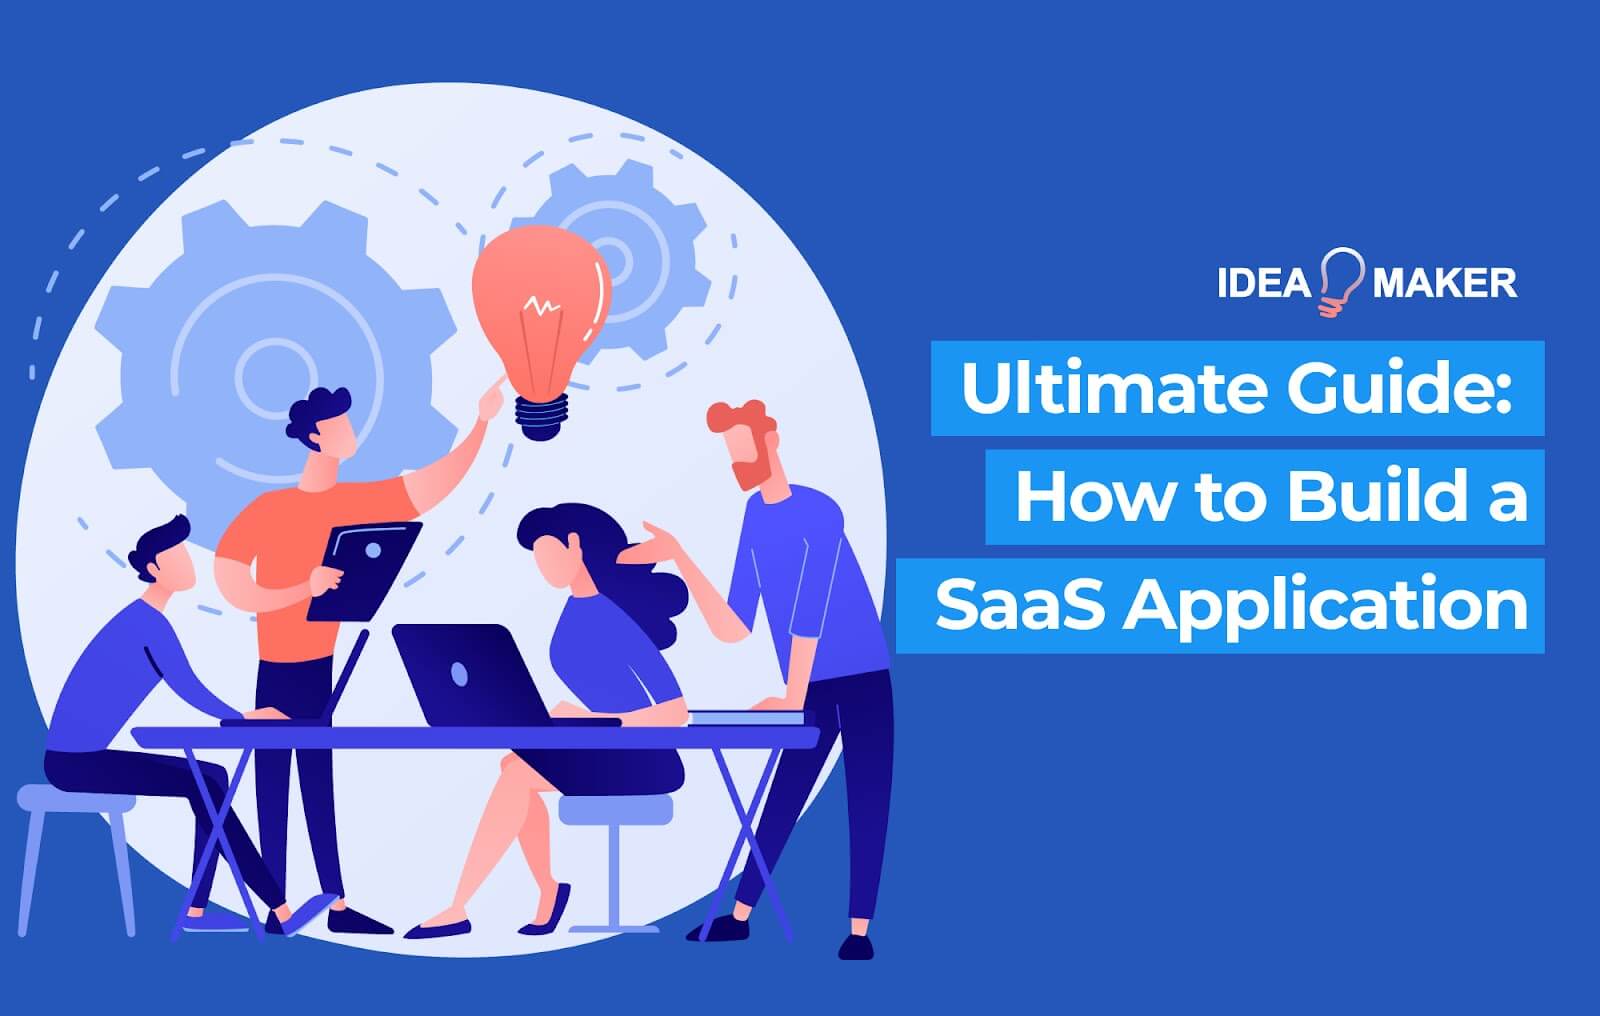 Ultimate Guide: How to Build a SaaS Application